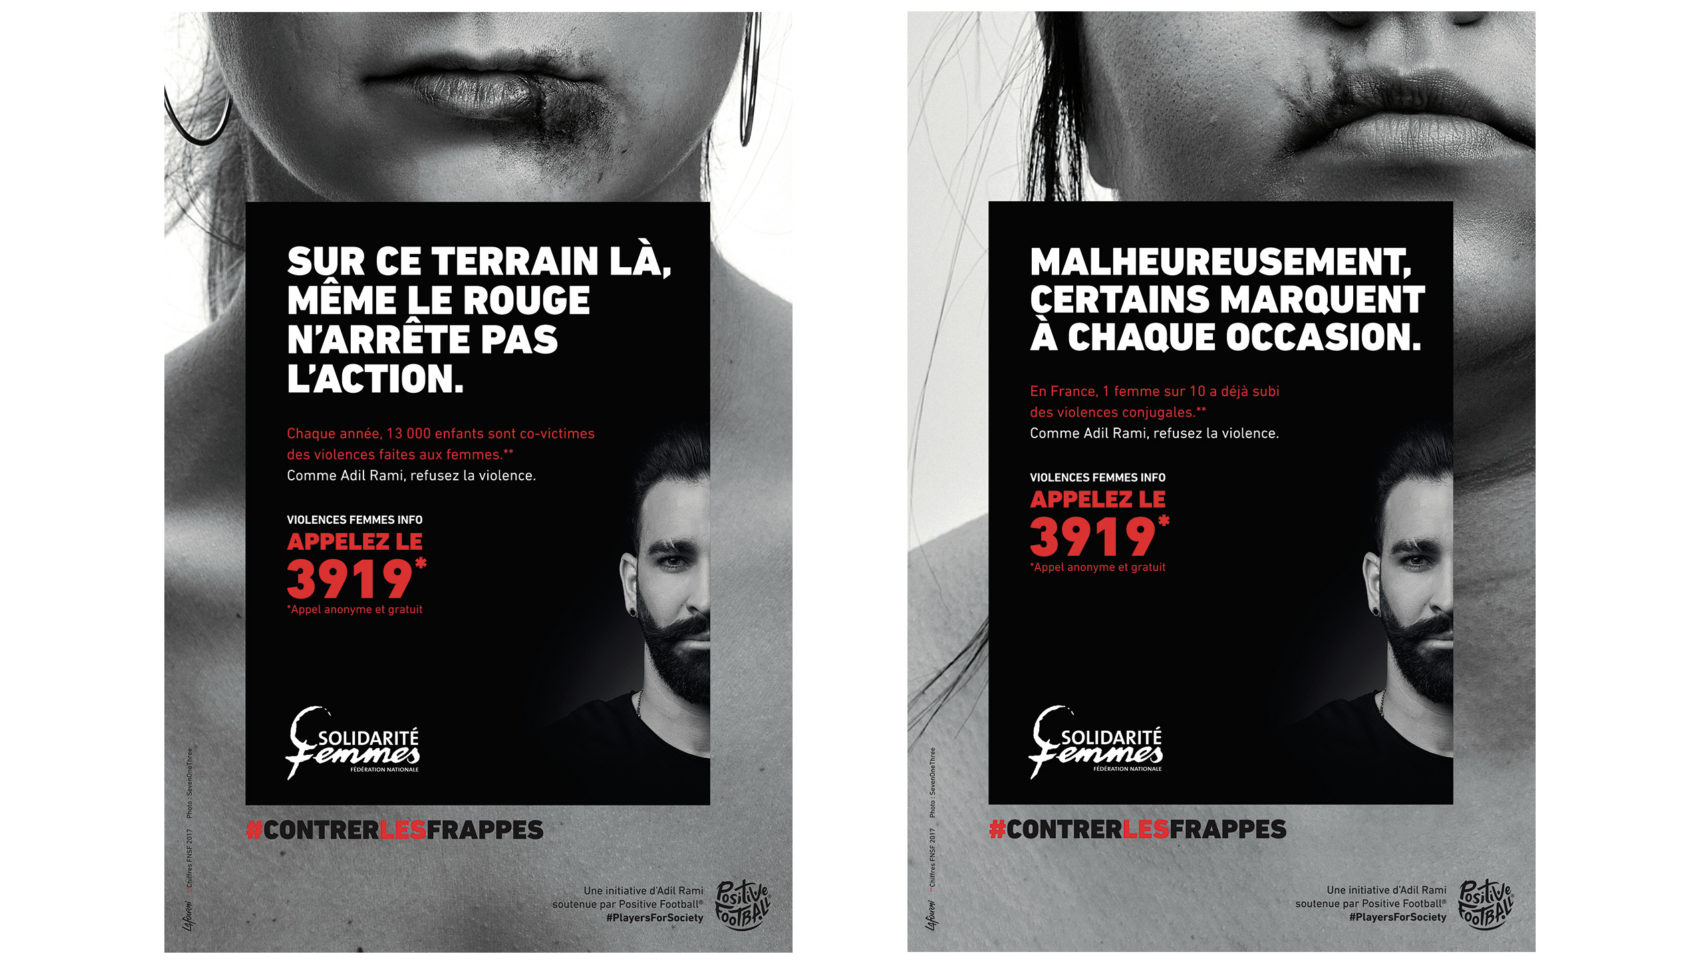 Projet_Positive_Football_Campagne_campaign_Violences_Adil_Rami_#CONTRERLESFRAPPES_